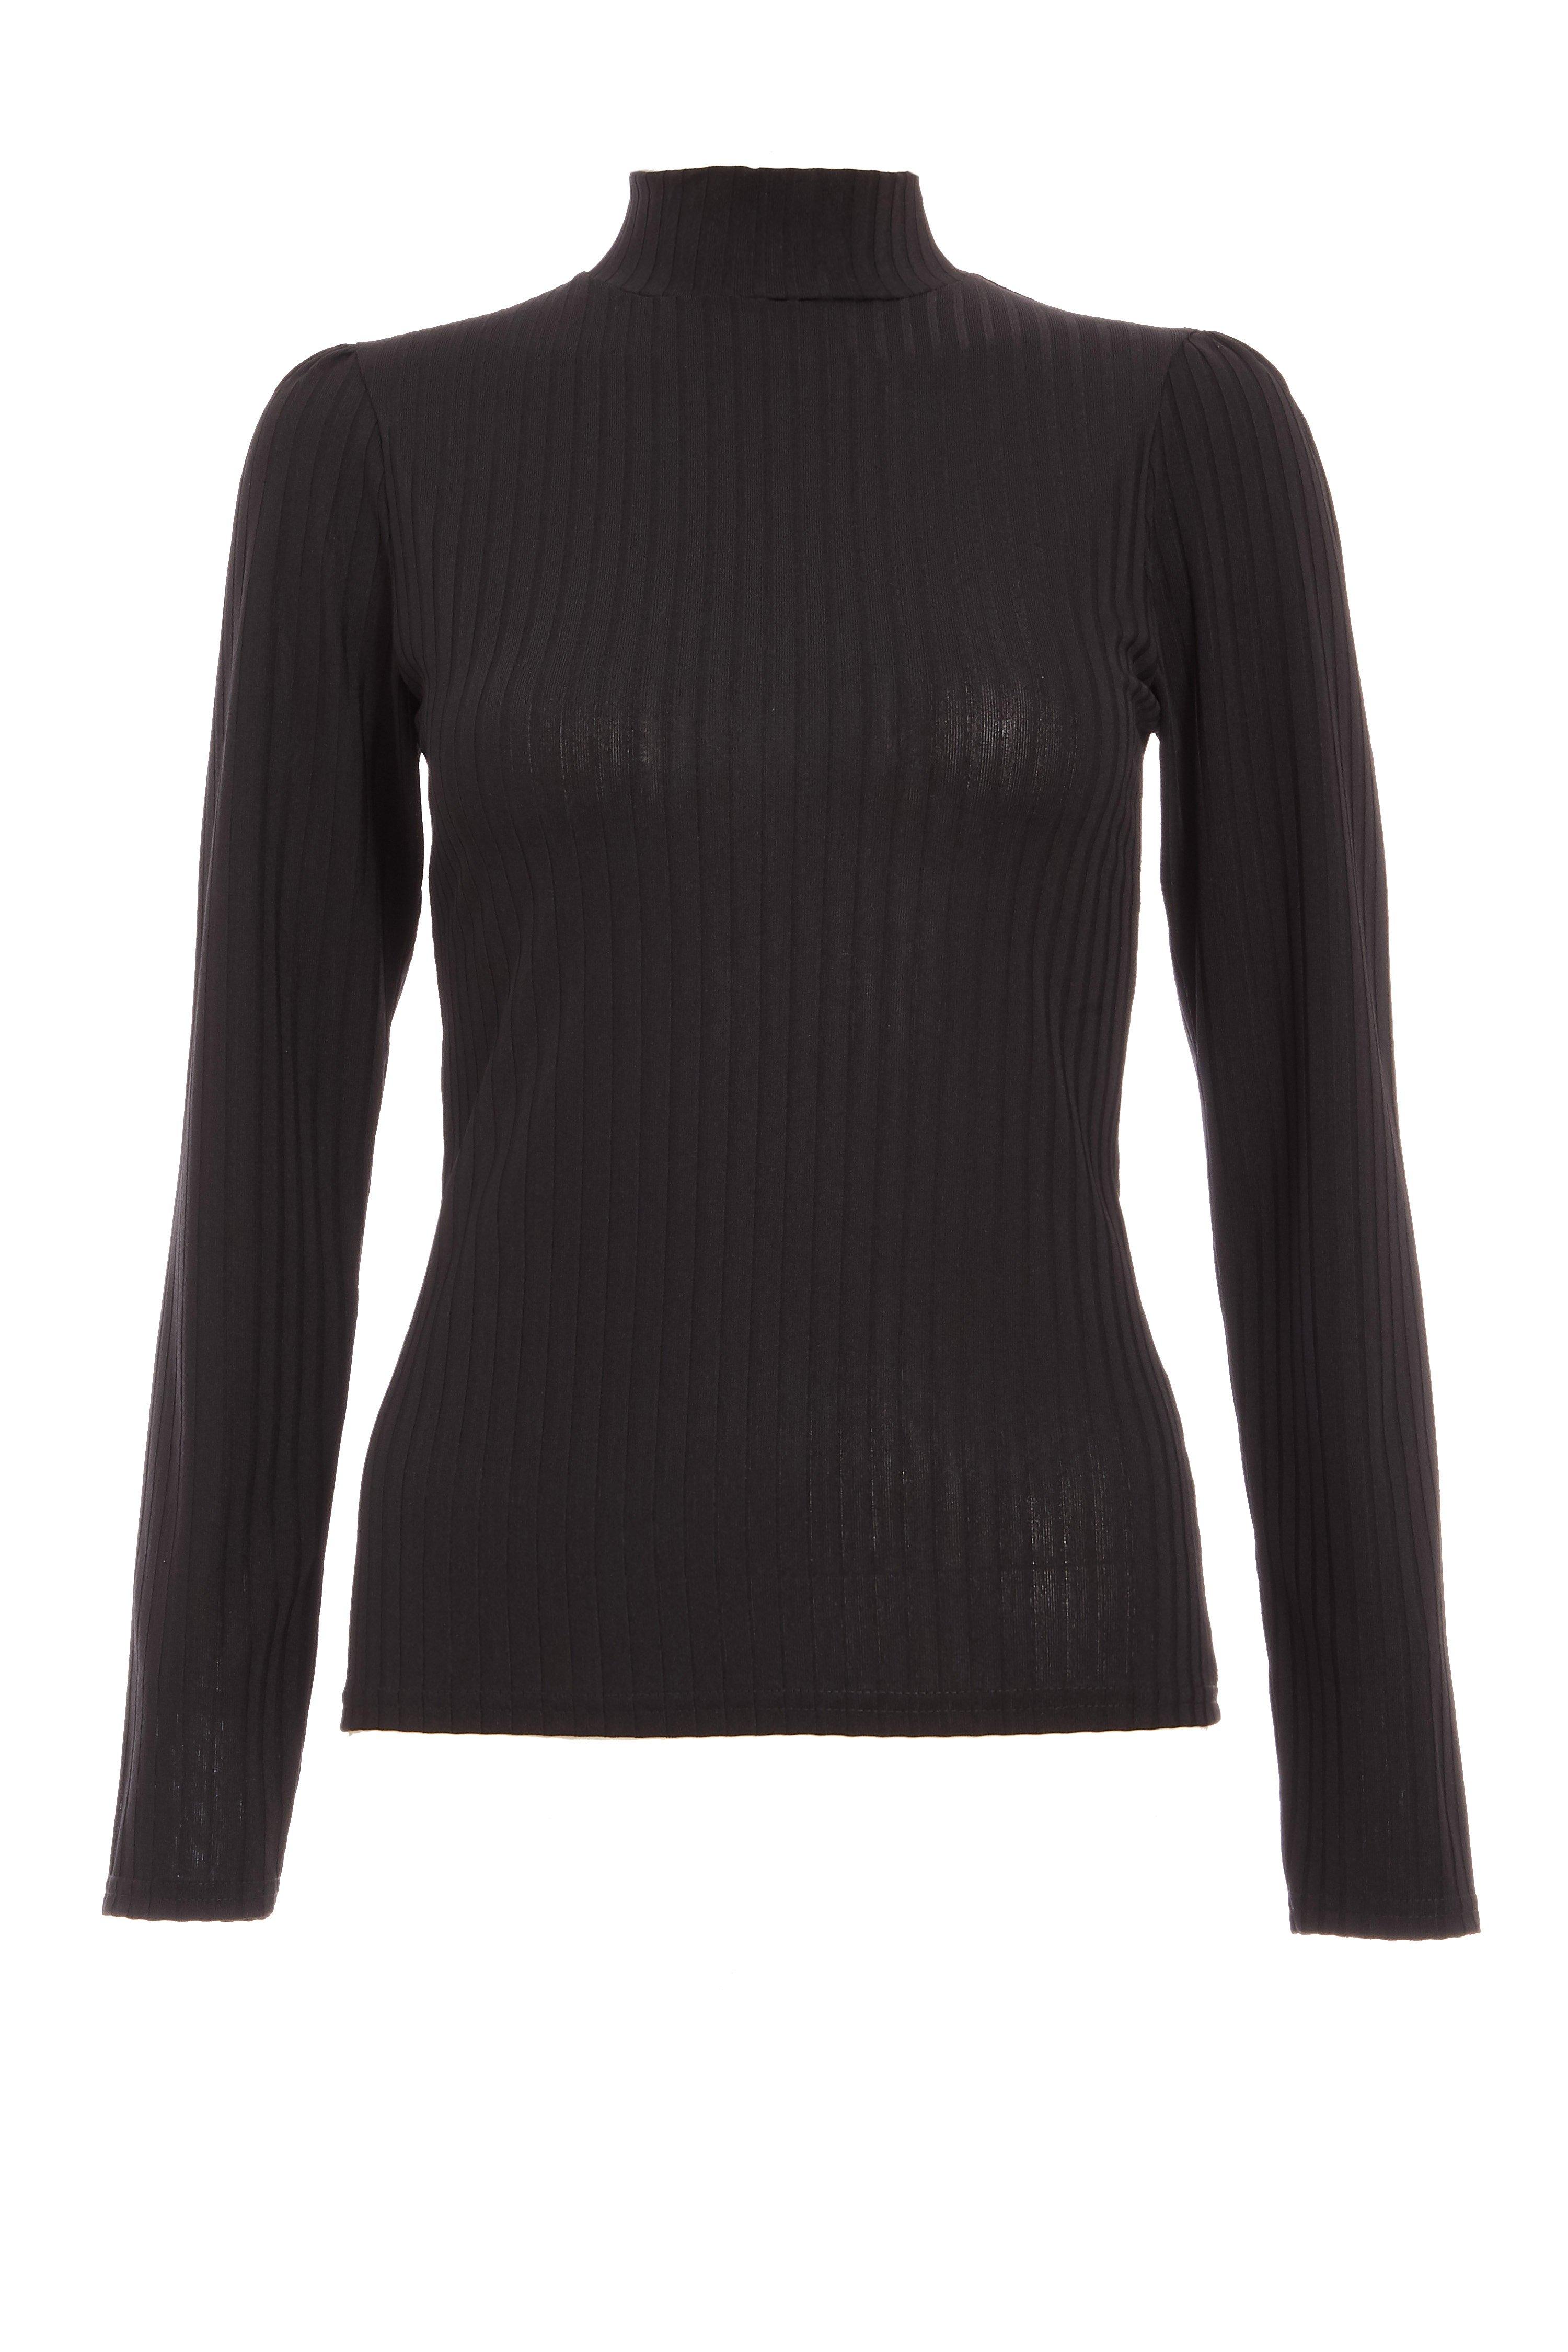 Black Knit Ribbed Turtle Neck Top - Quiz Clothing